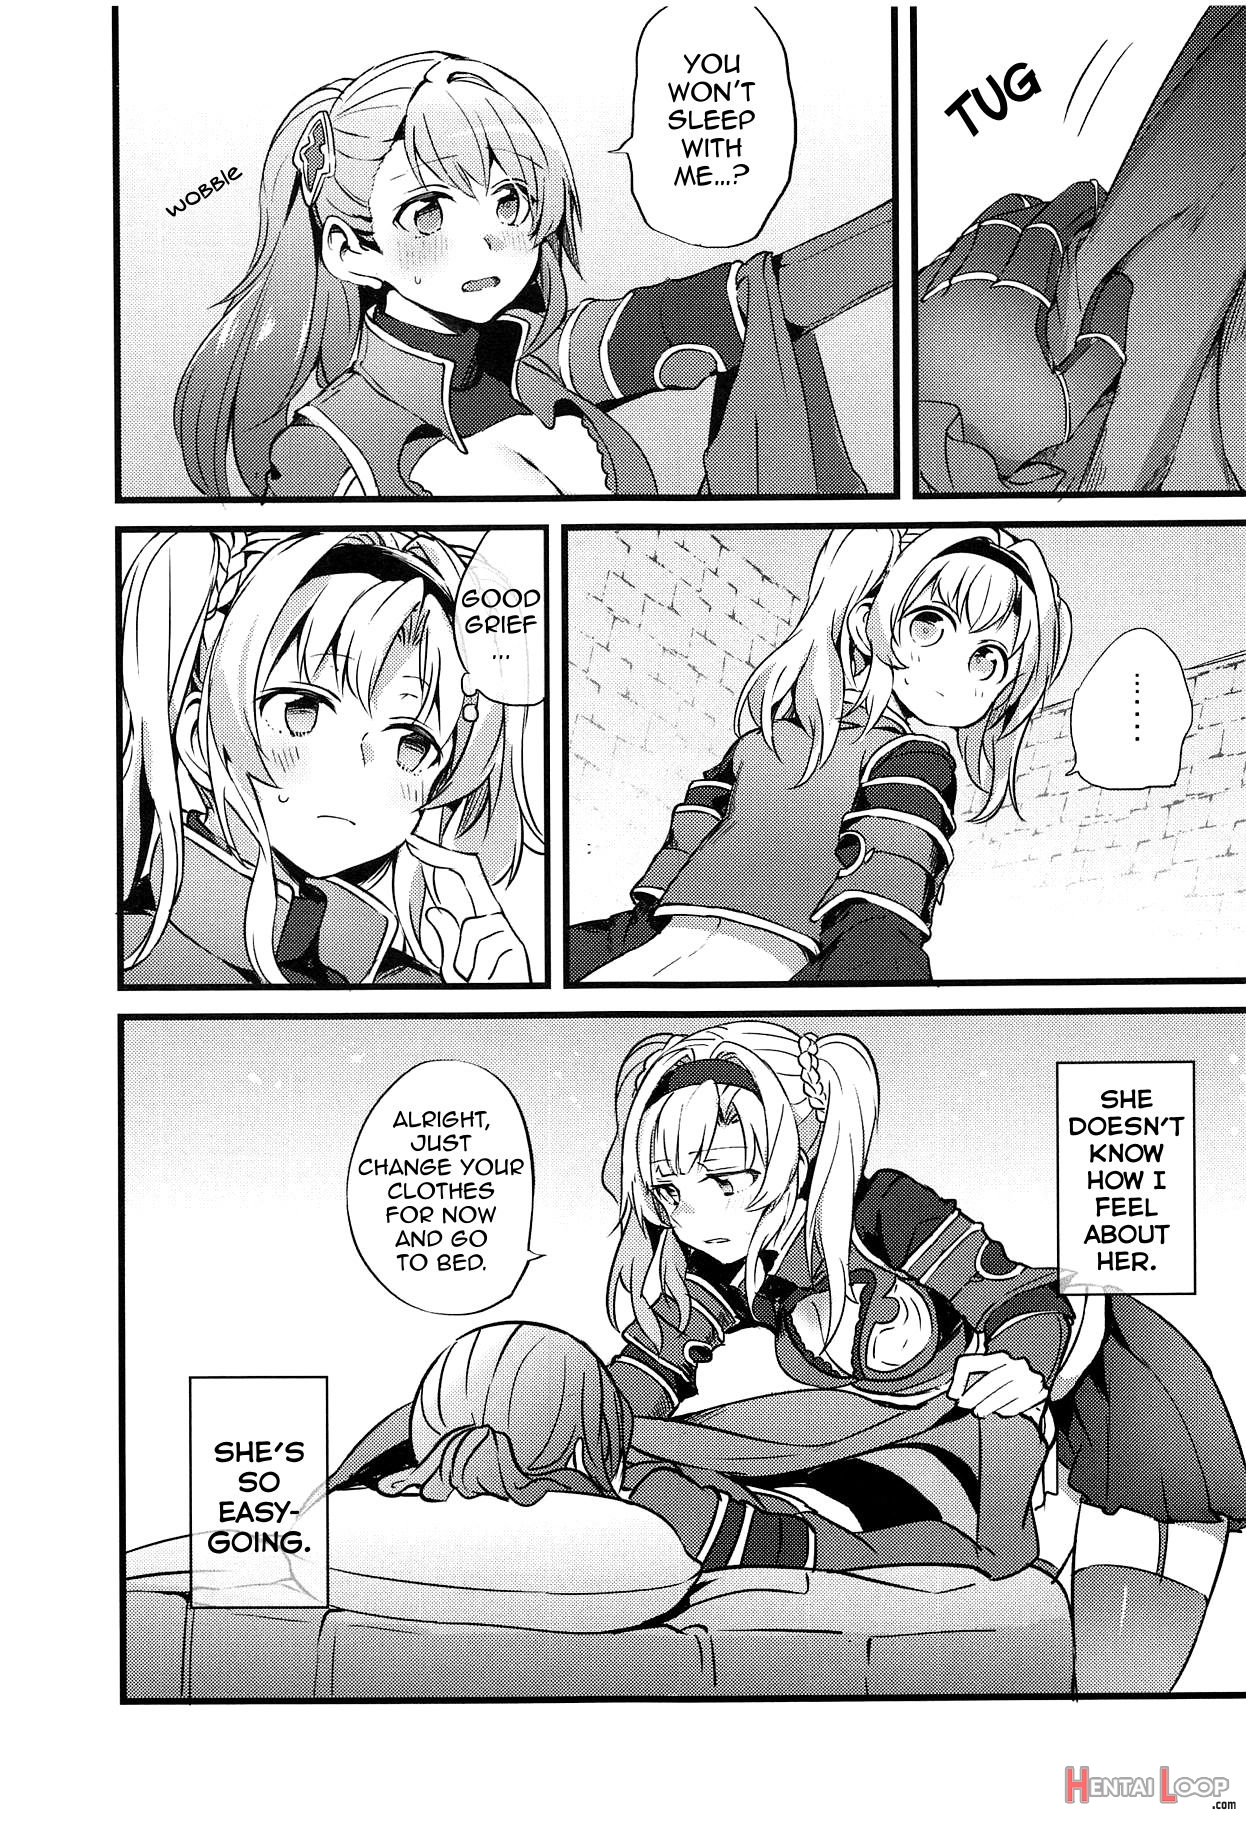 I Want To Have Sex With My Favorite Girl Erokawa_senpai] page 6